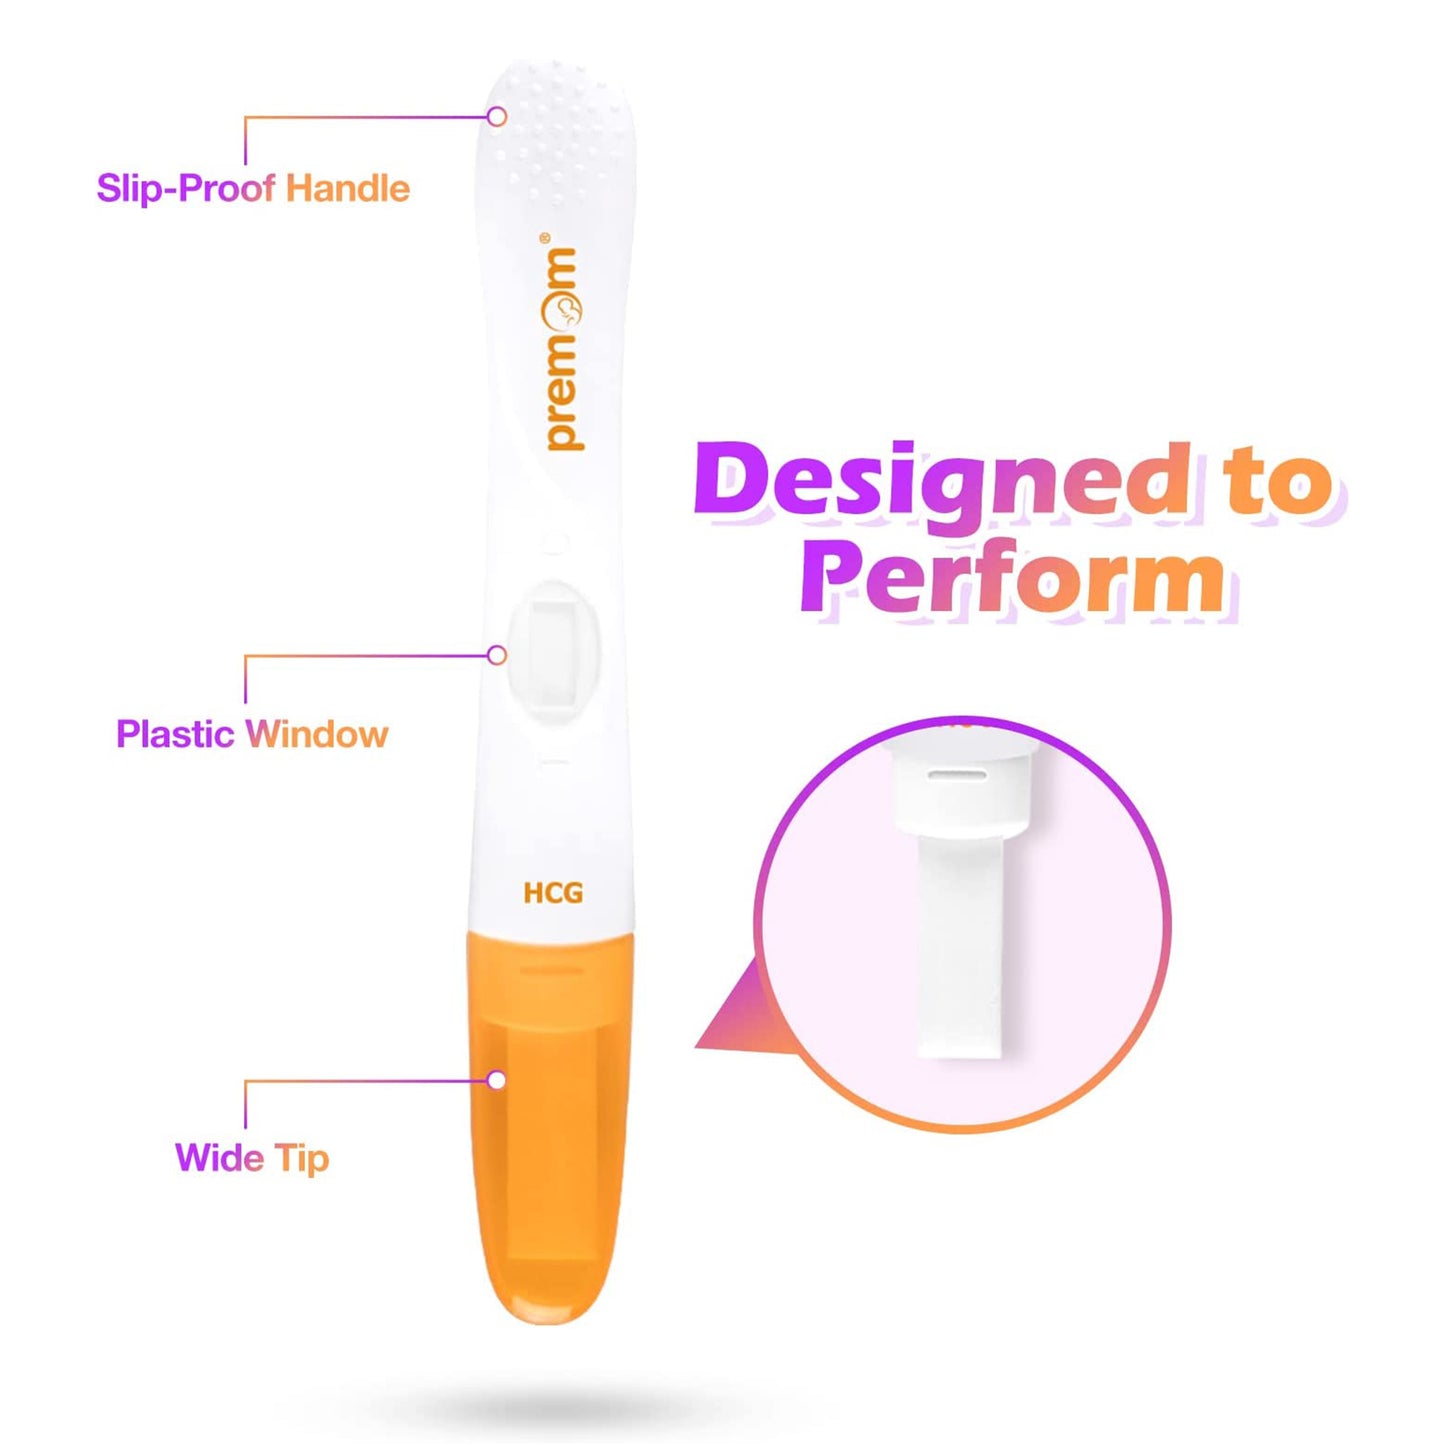 Premom Early Detection Pregnancy Test - 3 pack